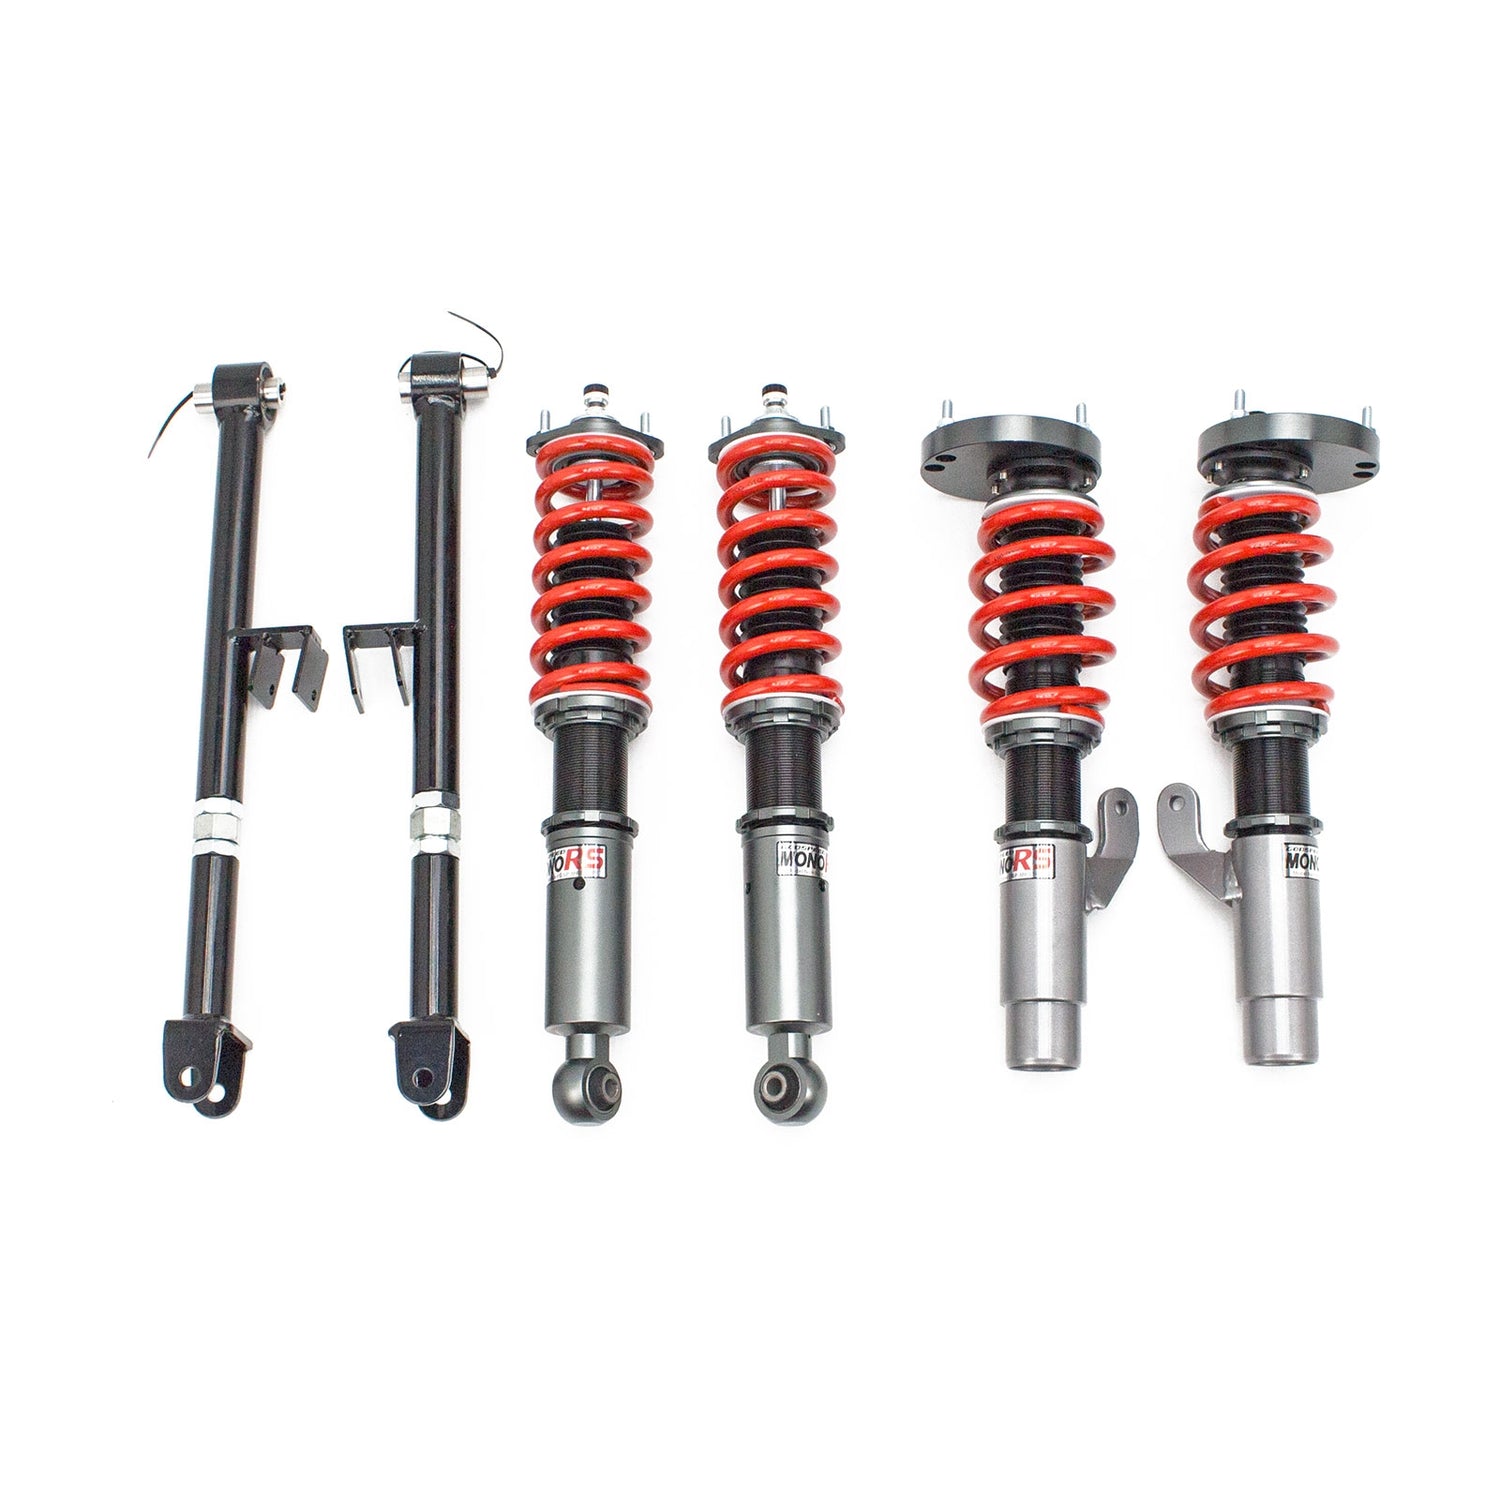 Godspeed MRS1419 MonoRS Coilovers Lowering Kit, True Coilover Conversion, 32 Damping Adjustments, Ride Height Ajustable